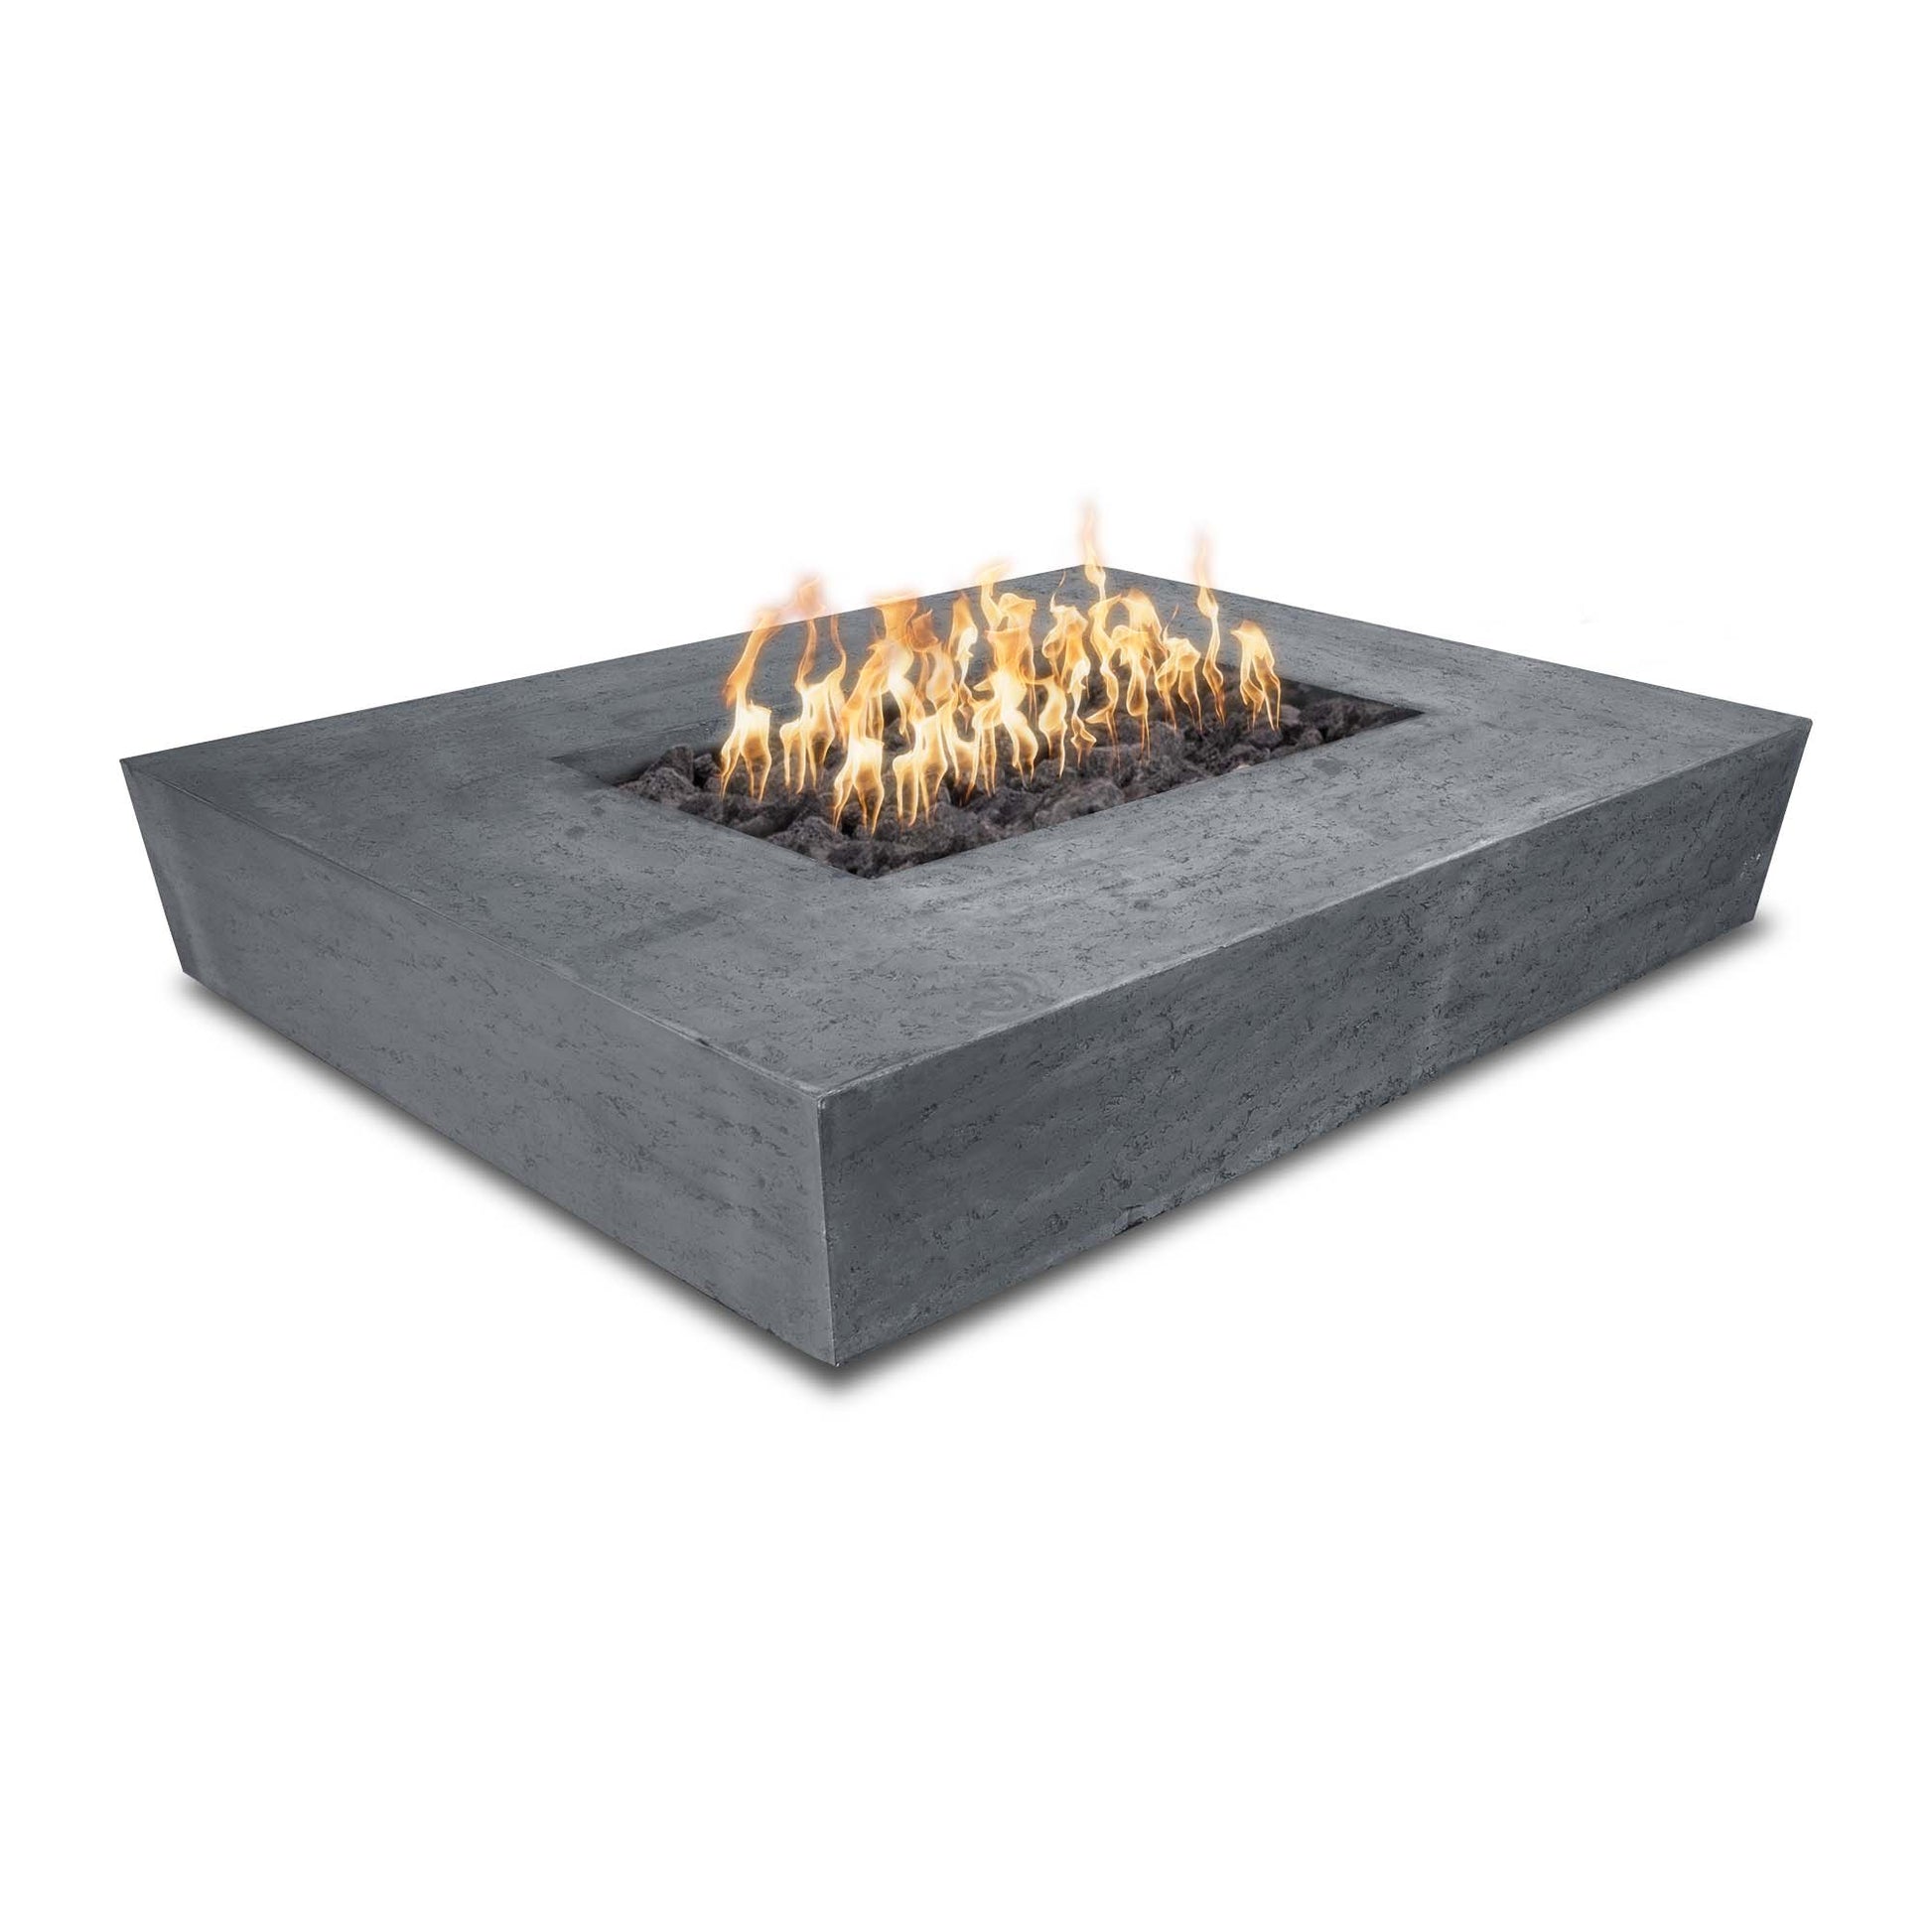 The Outdoor Plus Rectangular Heiko 58" Gray GFRC Concrete Natural Gas Fire Pit with 110V Electronic Ignition